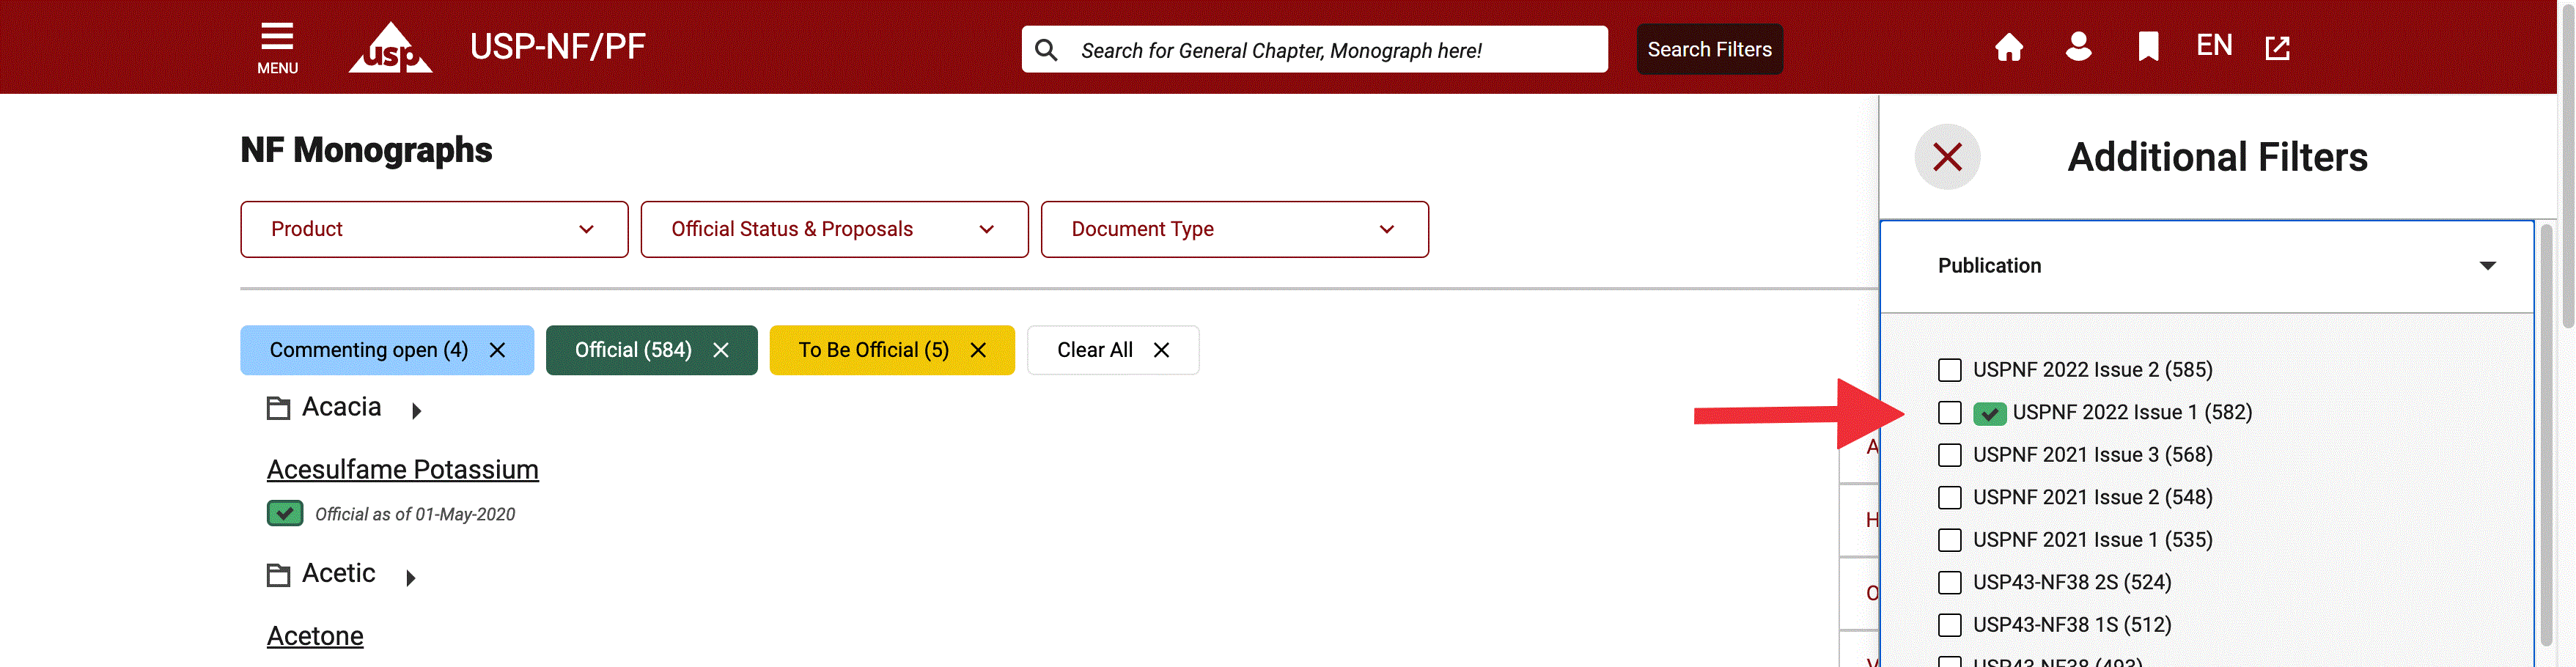 When searching for a document through the navigation bar, the currently official version documents are shown by default, but you have the option to switch to any available USP-NF/PF versions from the PUBLICATION filter found on the right.